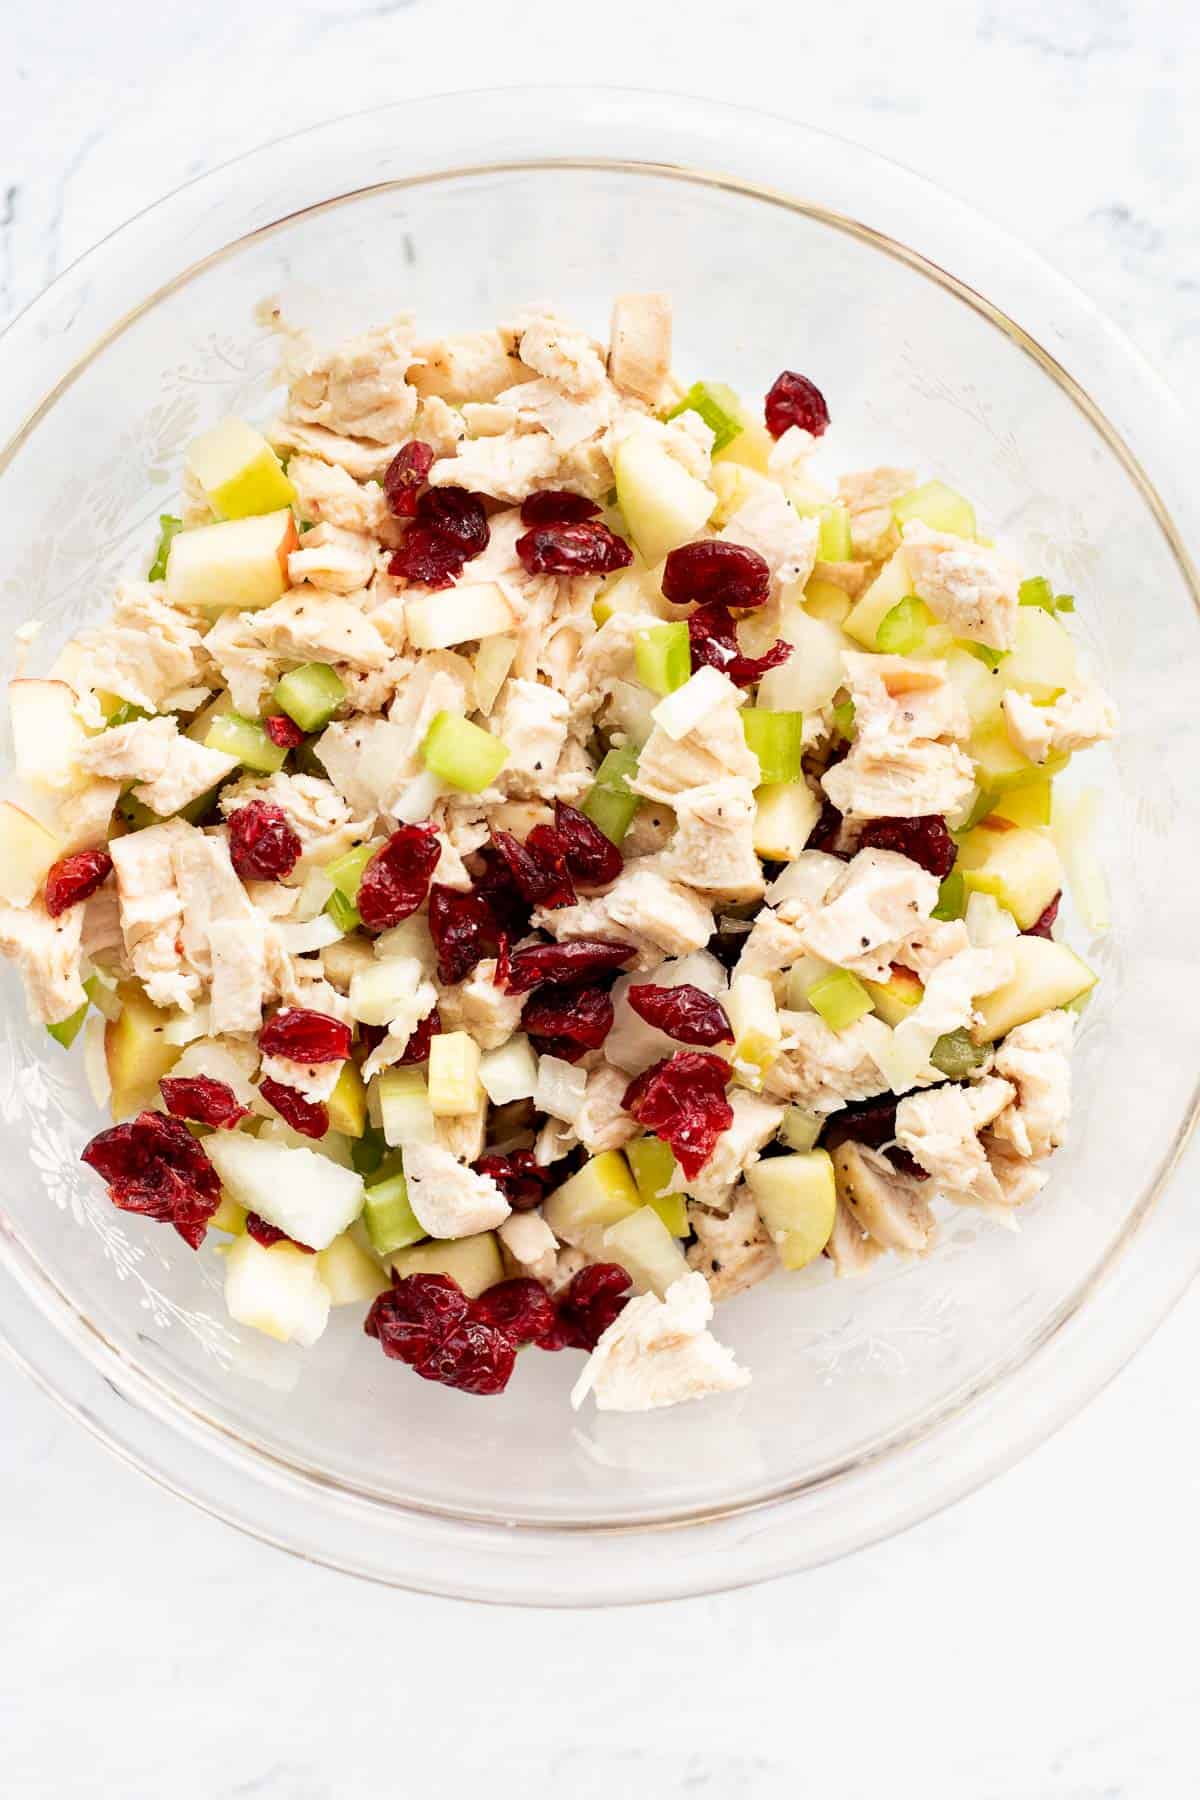 chicken breast, celery, onions, apples, and dried cranberries in a glass bowl.